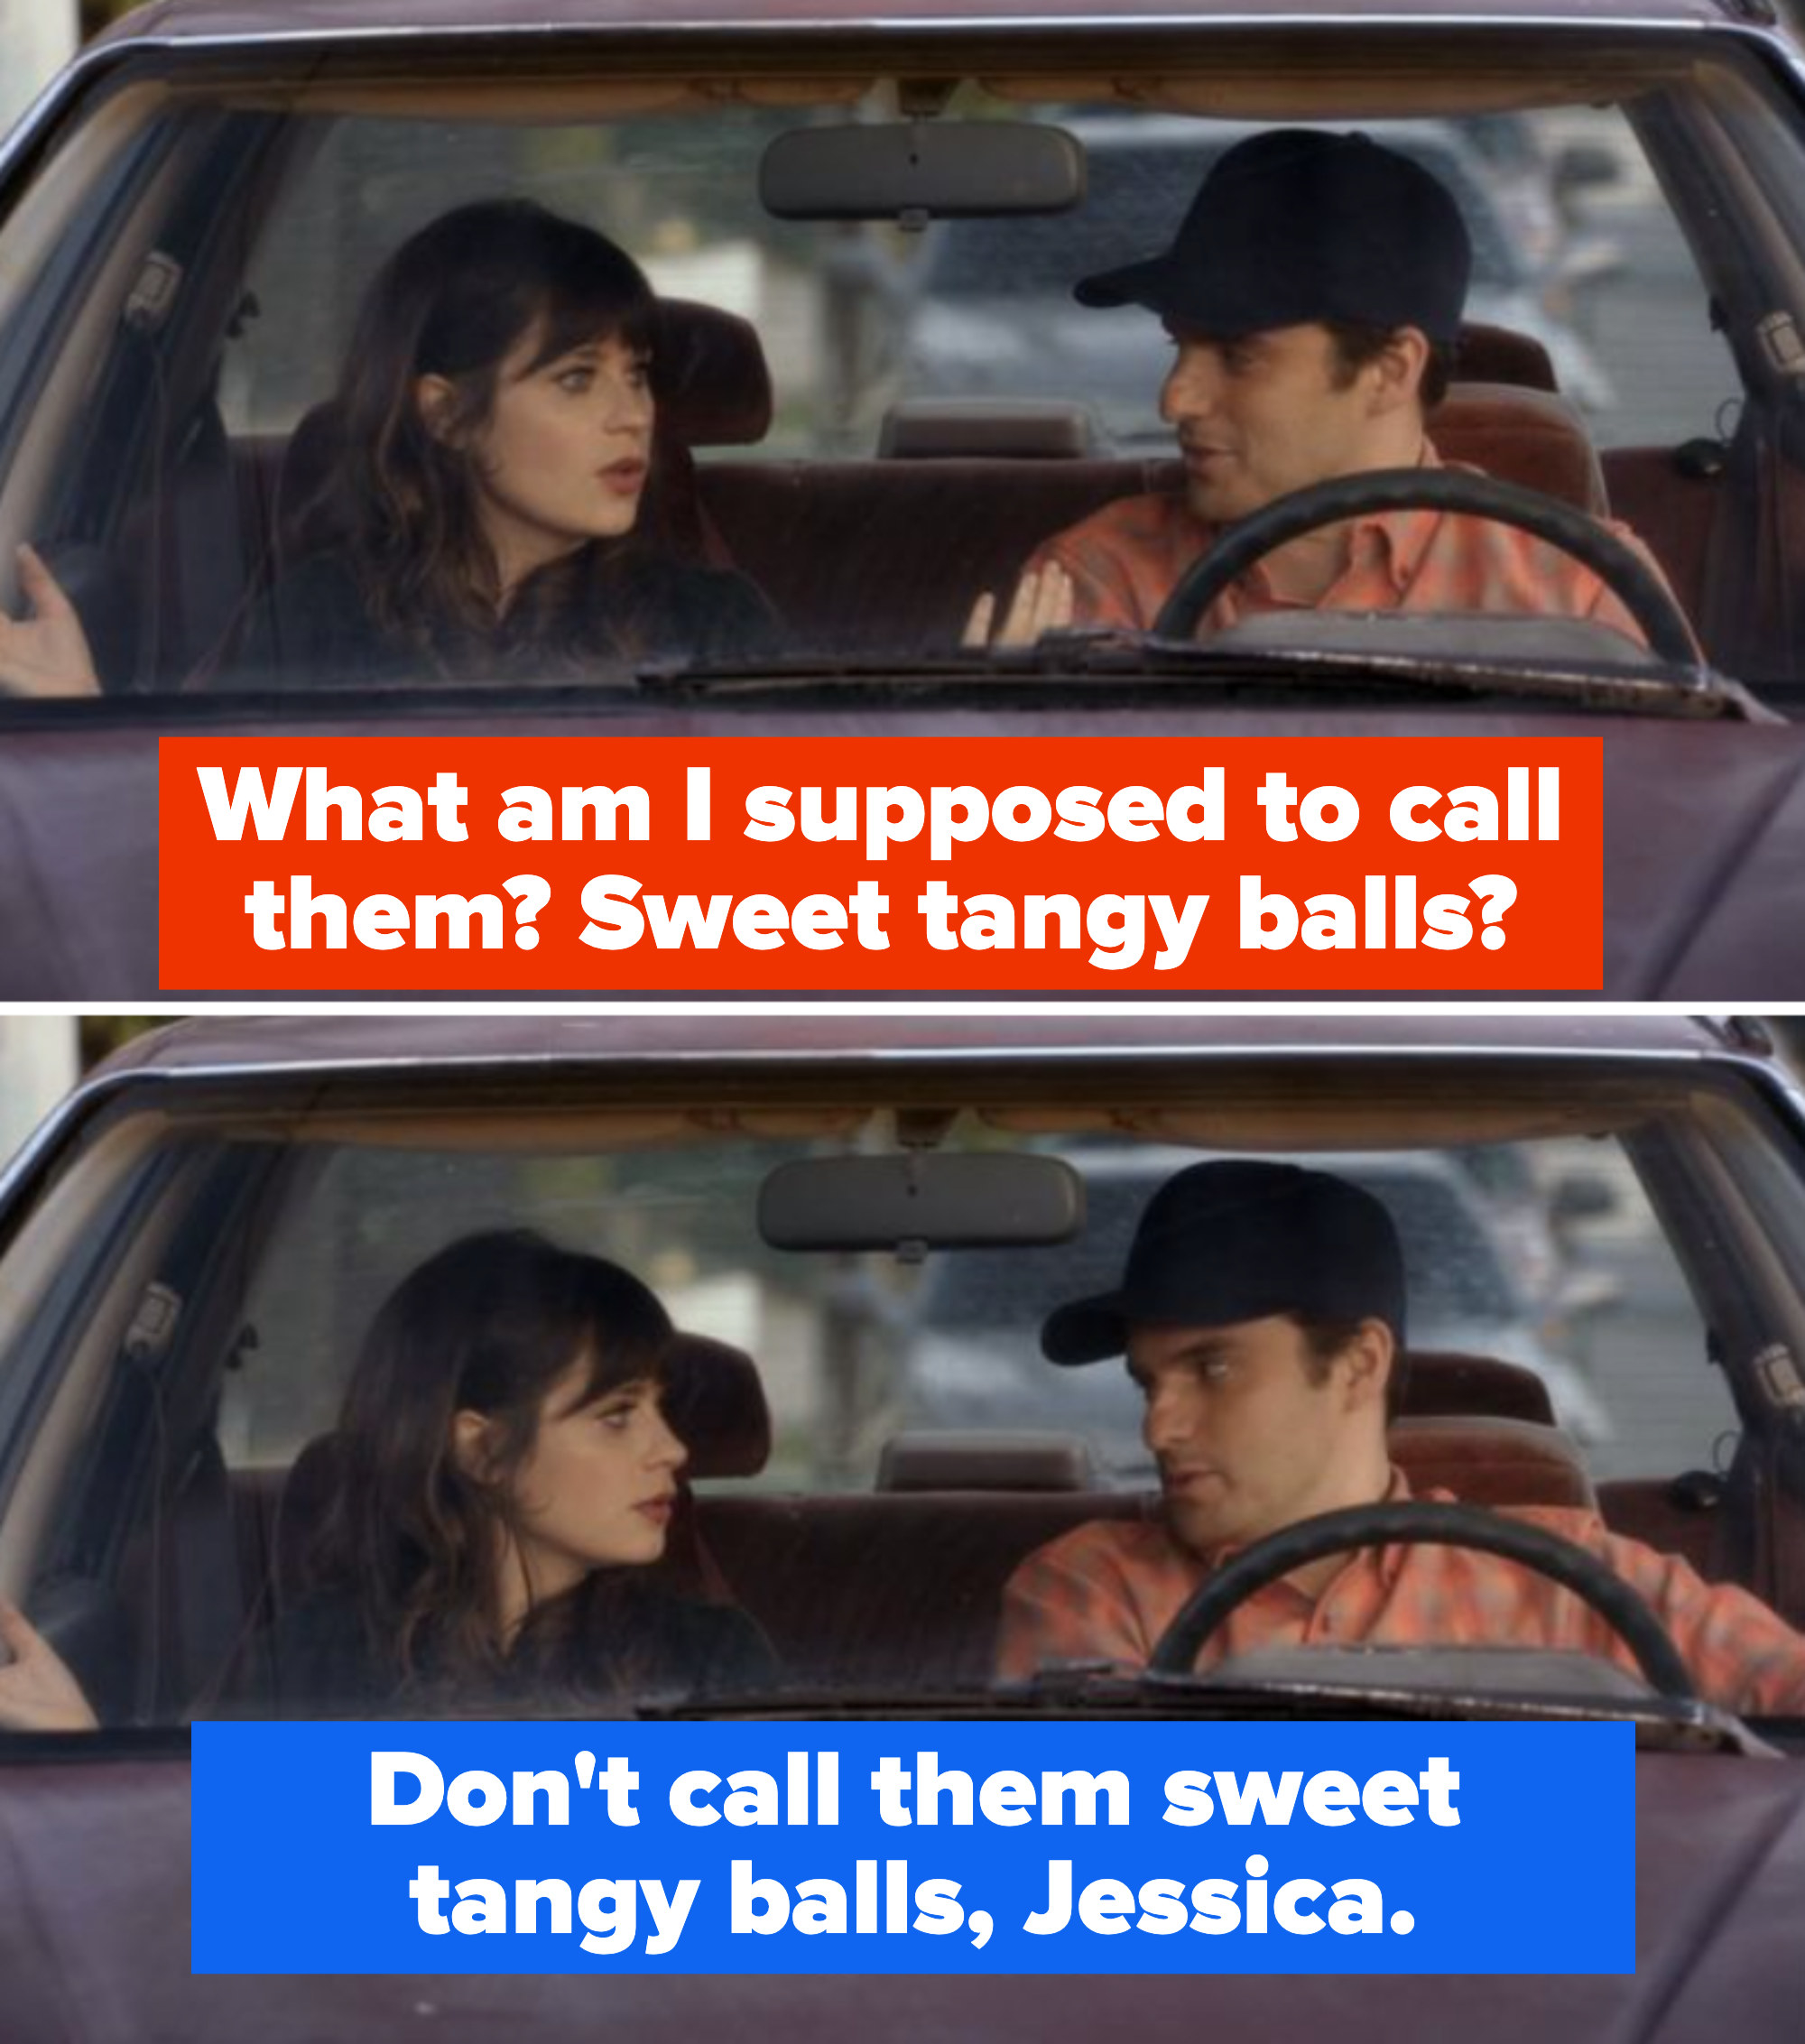 Jess asks, &quot;What am I supposed to call them? Sweet tangy balls?&quot; And Nick tells her not to call them sweet tangy balls